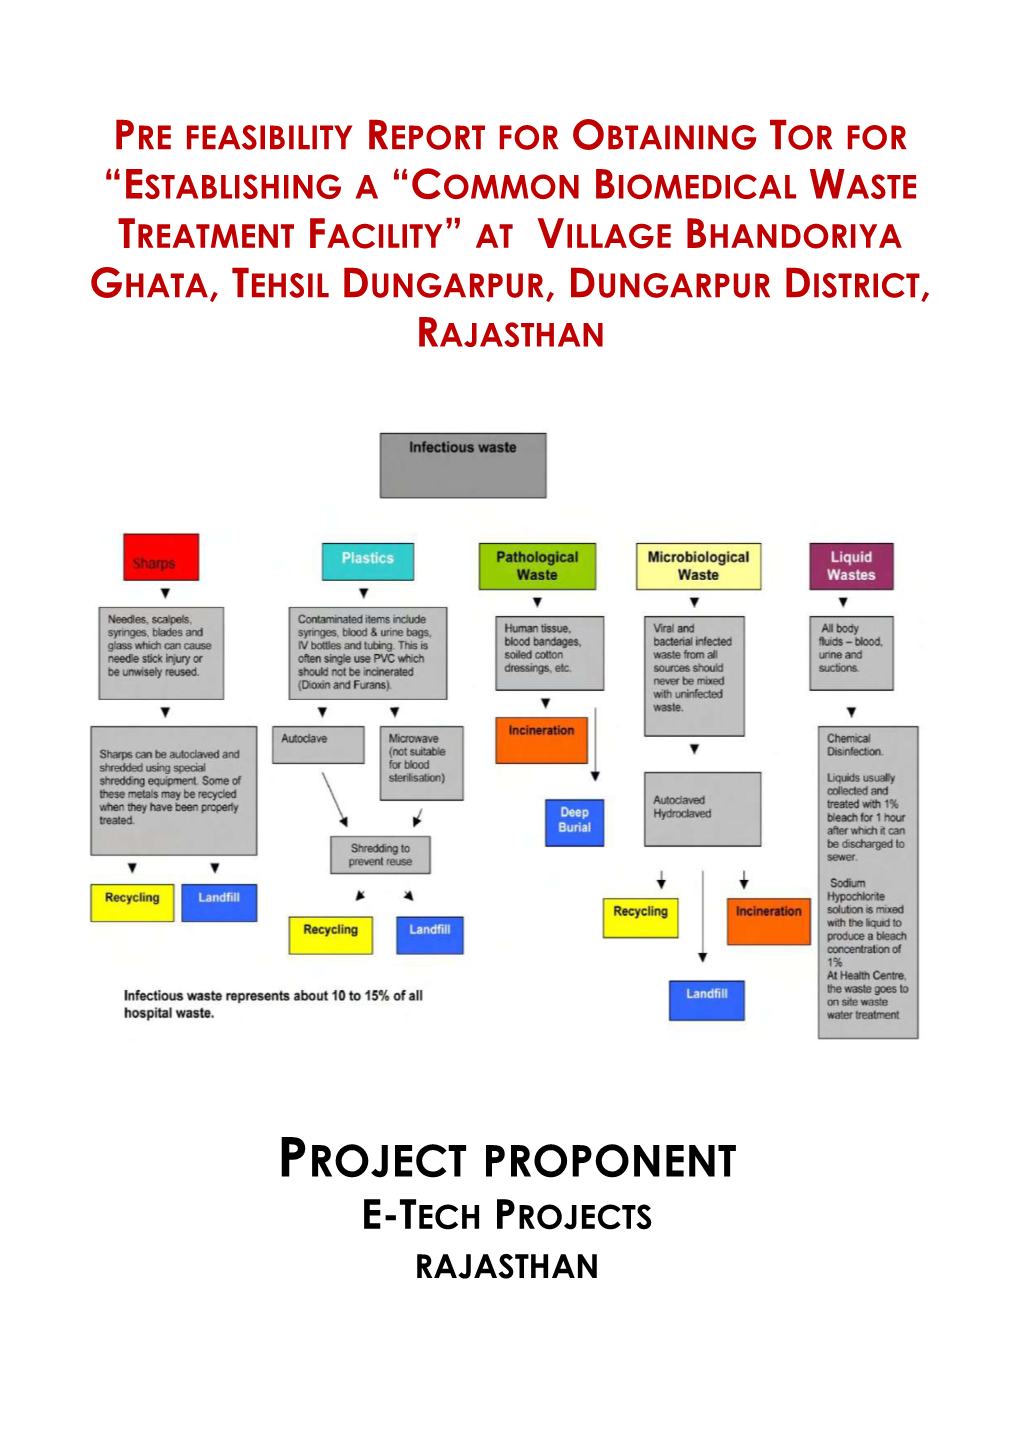 Project Proponent